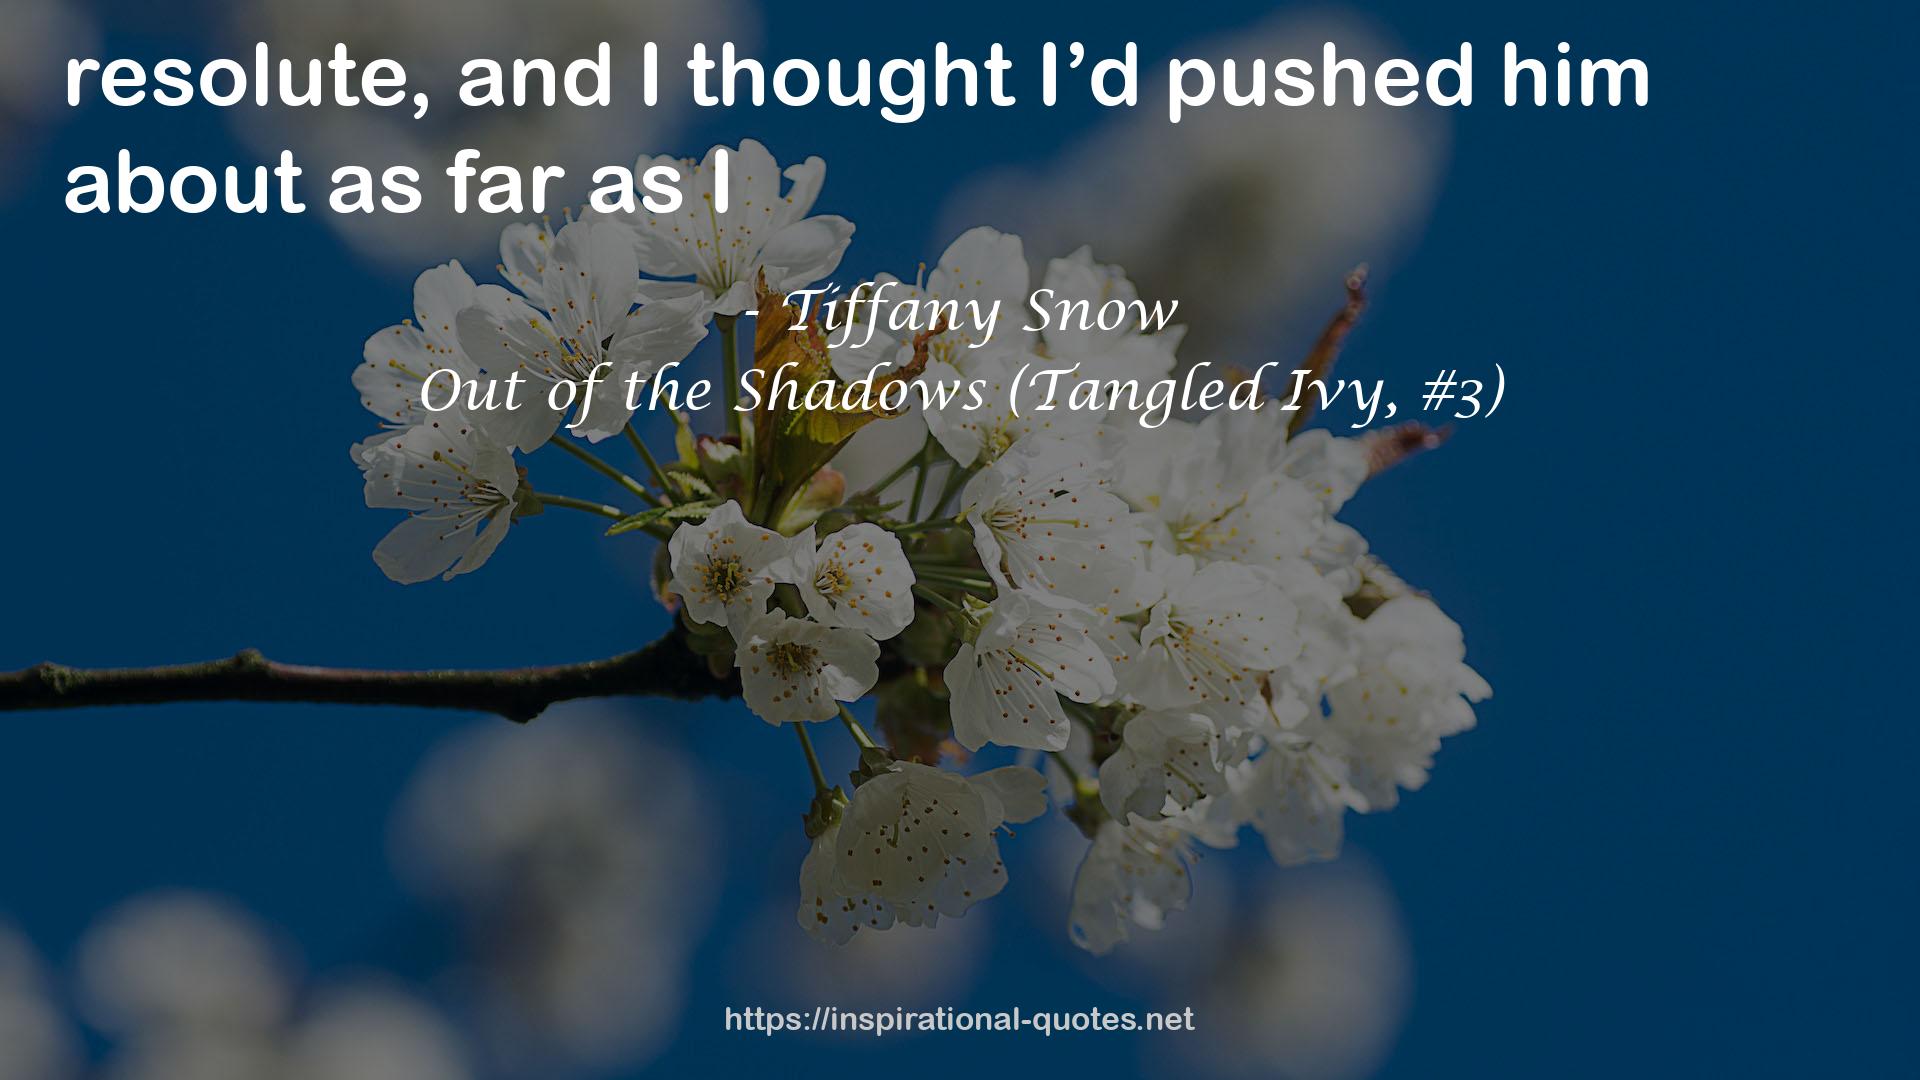 Out of the Shadows (Tangled Ivy, #3) QUOTES